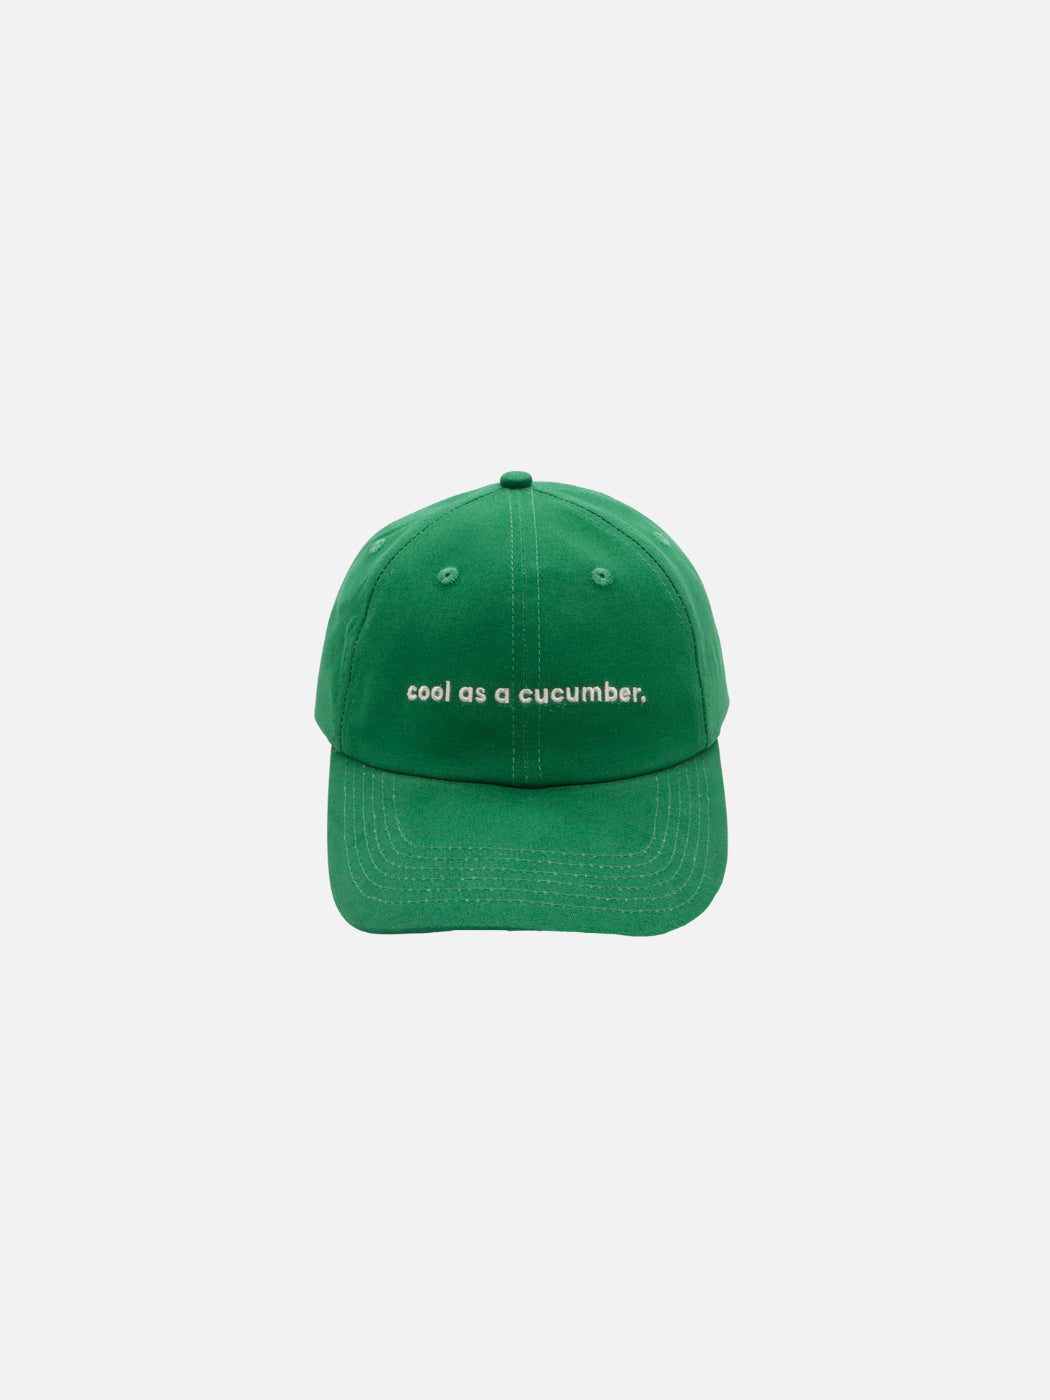 Cap with cool as a cucumber embroidered on the front